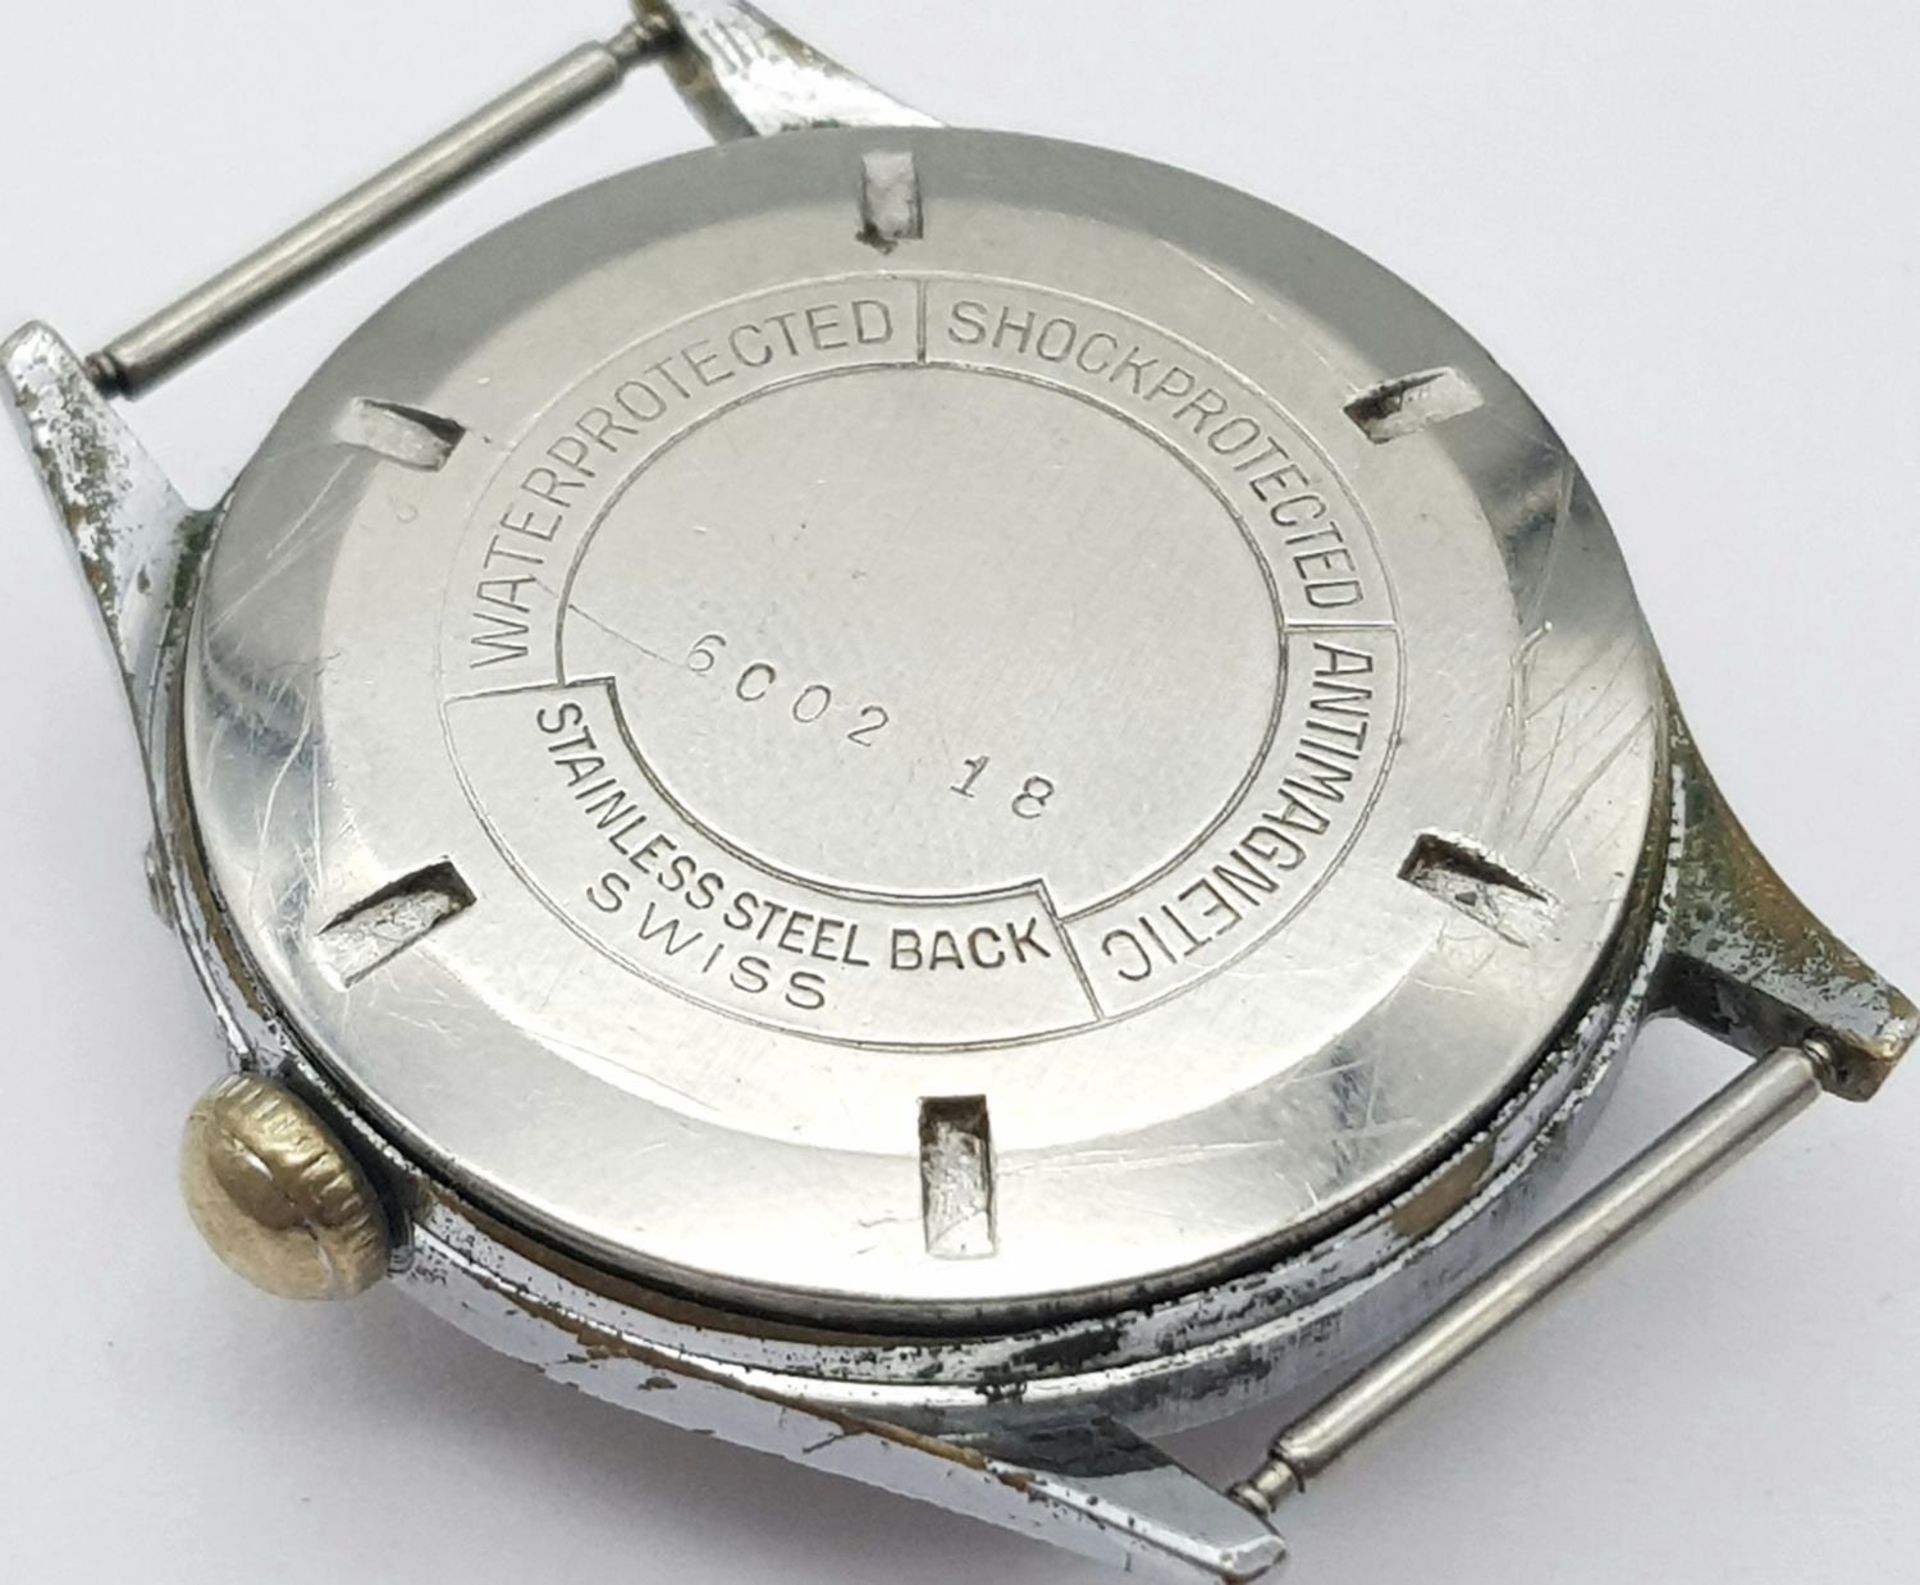 A Vintage Roamer Calendar 17 Jewels Stainless Steel Watch Case -33mm. Patinaed dial with sub dial. - Image 4 of 4